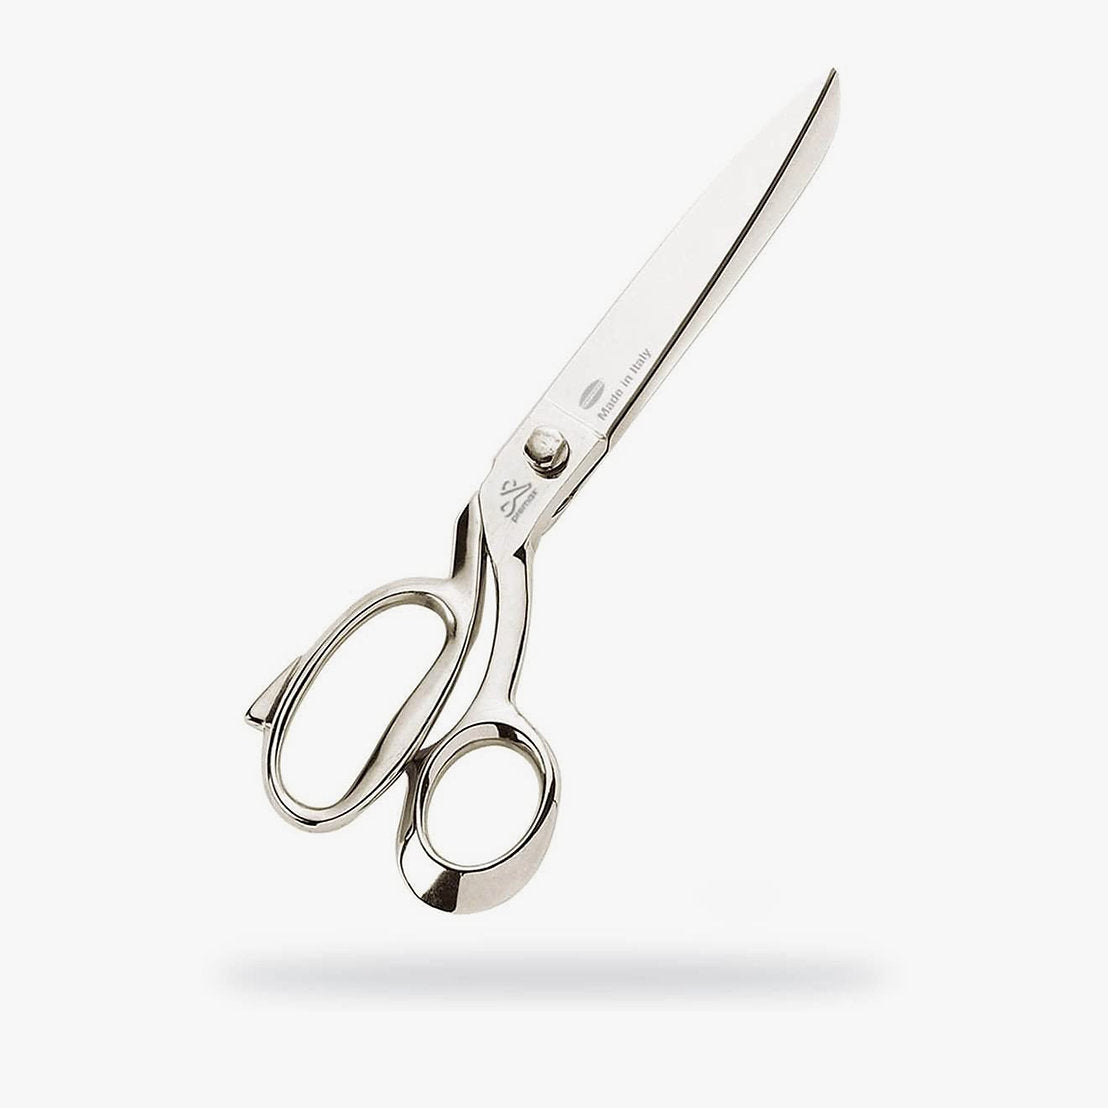 Premax Tailors Scissors 23 cm Classic Collection 10603 | High Quality Sewing Tools